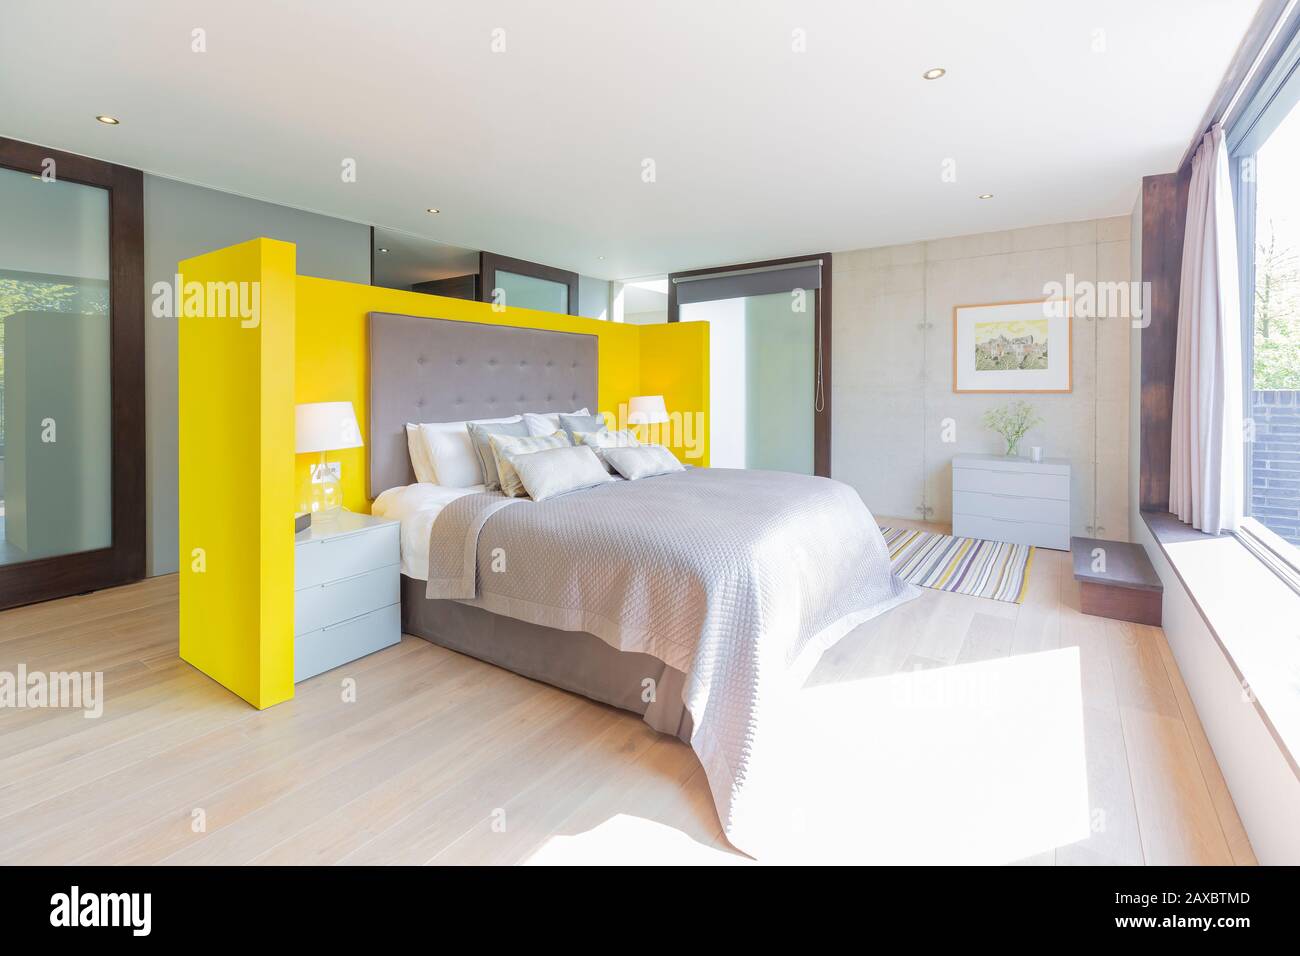 Modern bedroom with yellow and gray headboard Stock Photo